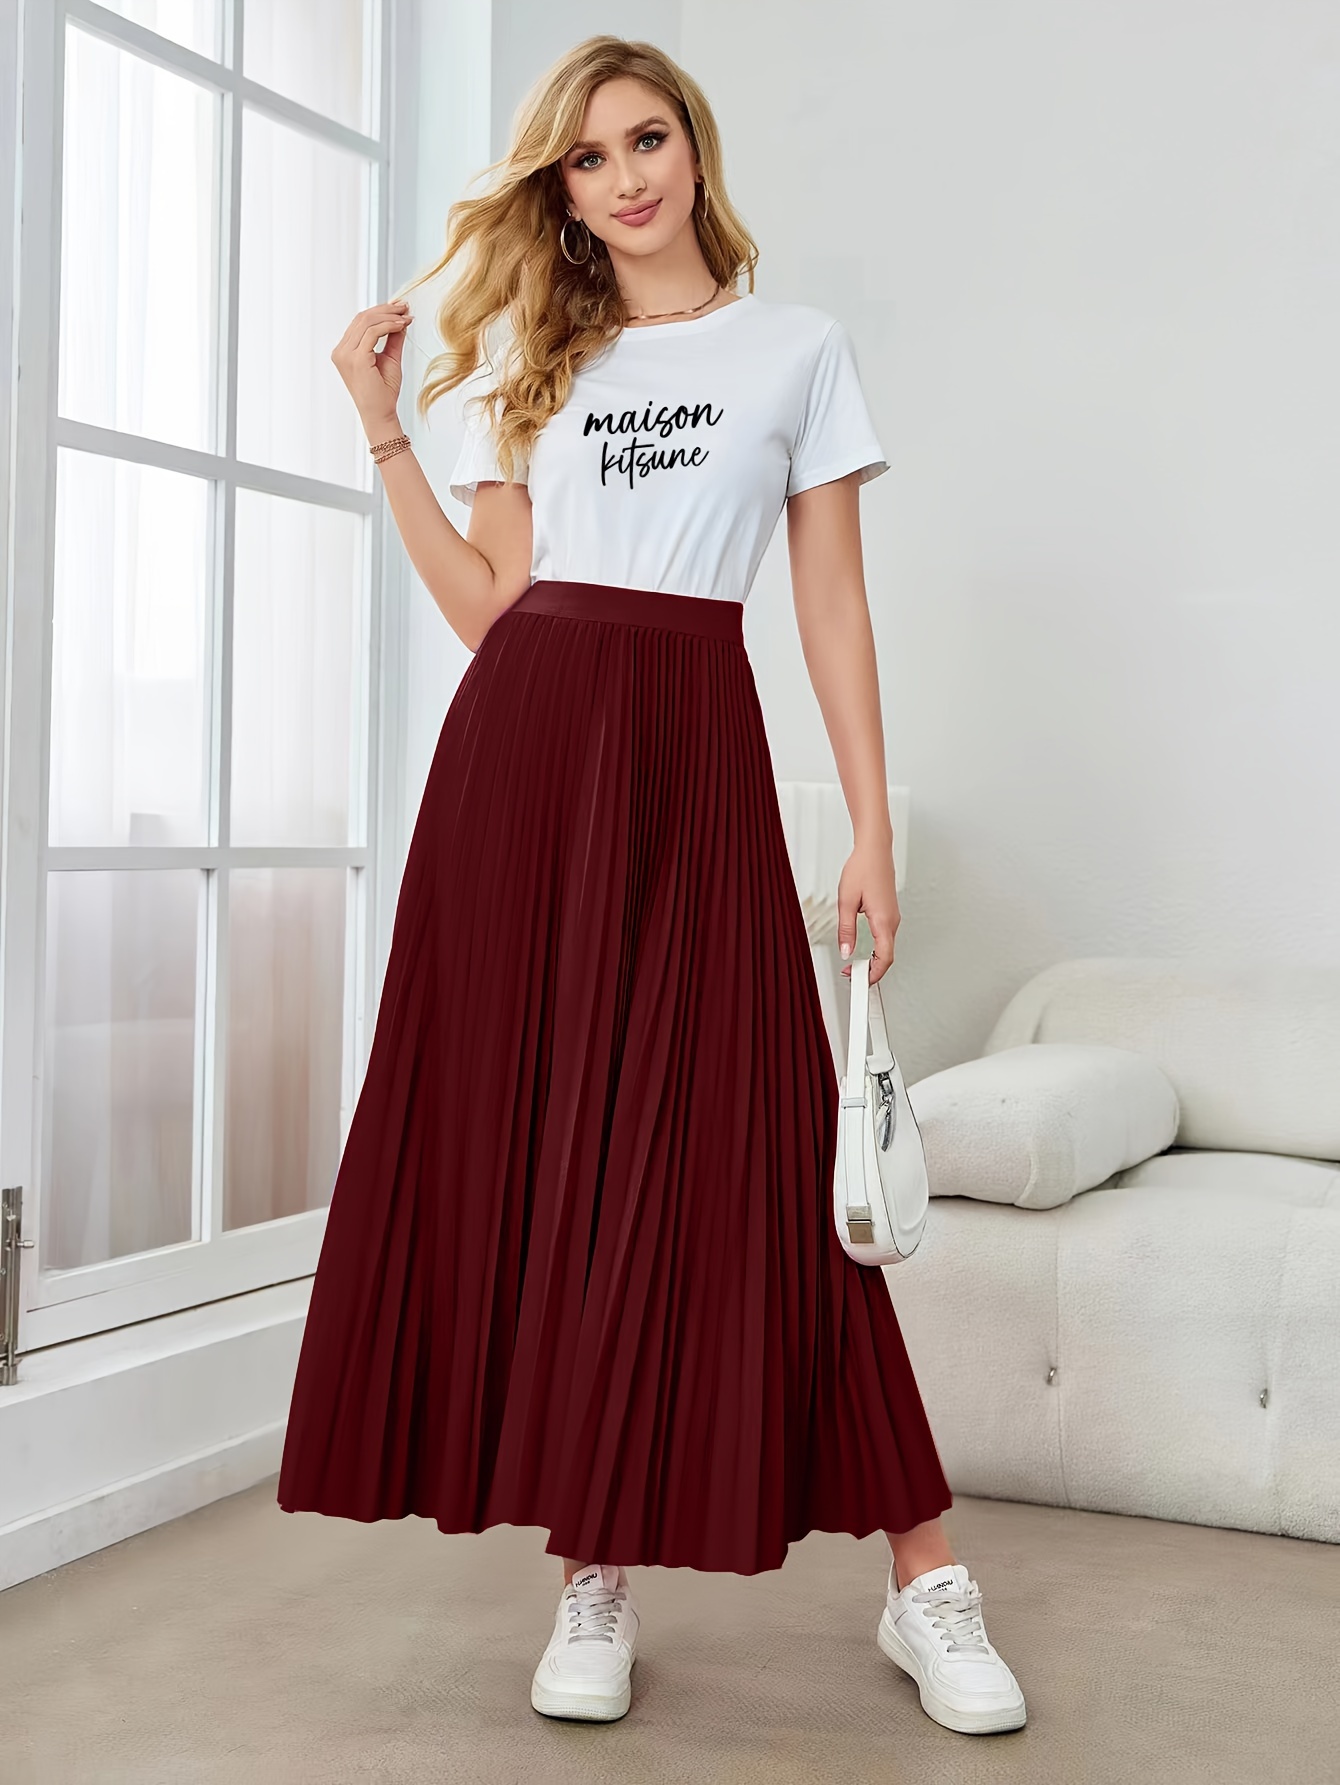 Pleated Solid Color Skirt, Loose Skirt For Spring & Summer, Women's Clothing